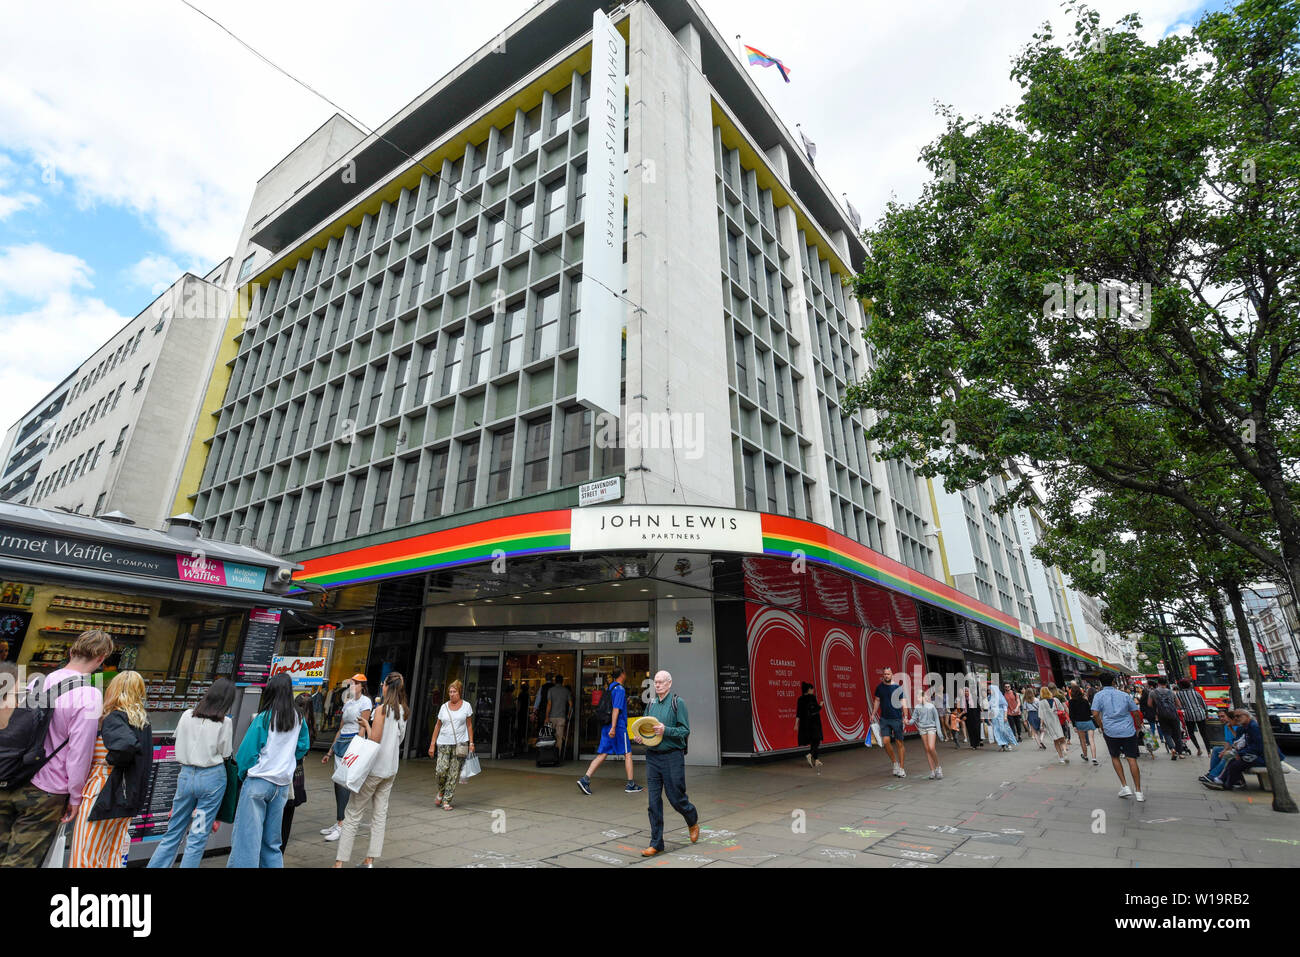 London, UK. 1 July 2019. The John Lewis department store in Oxford Street  is one of many stores in the capital's West End whose exteriors are  decorated in rainbow colours in support